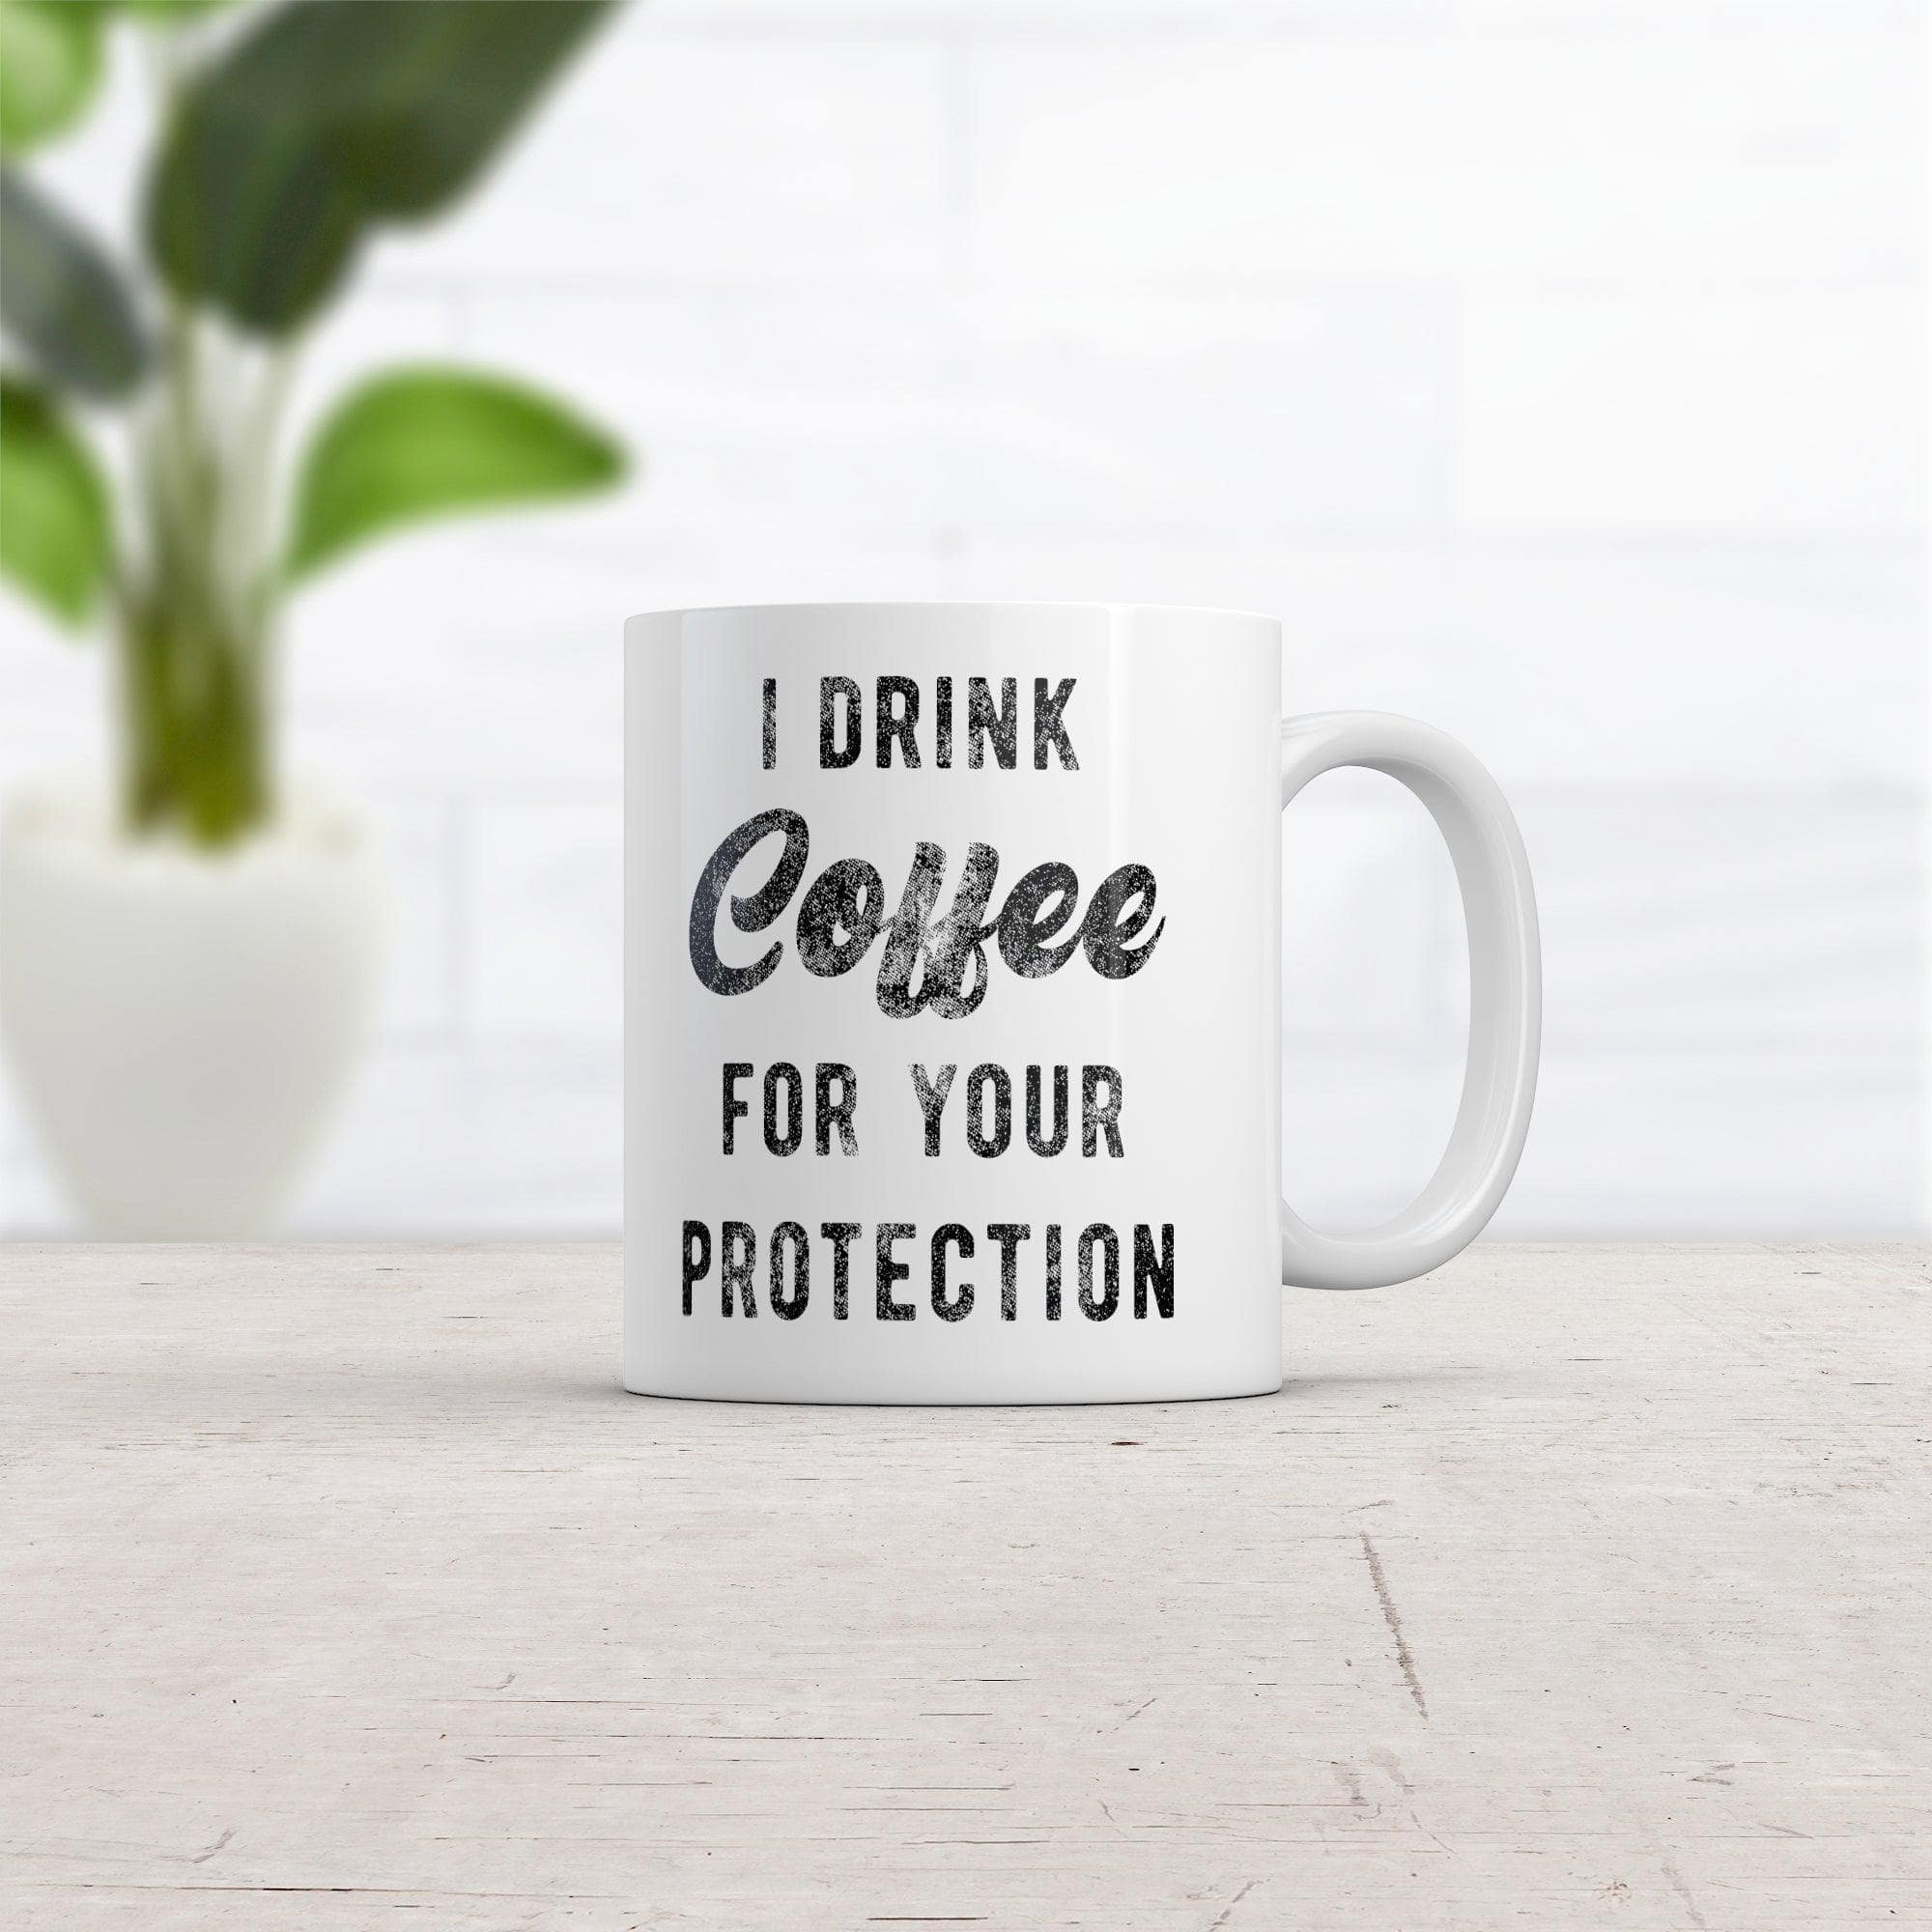 I Drink Coffee For Your Protection Mug Funny Sarcastic Caffeine Lovers Novelty Cup-11oz  -  Crazy Dog T-Shirts